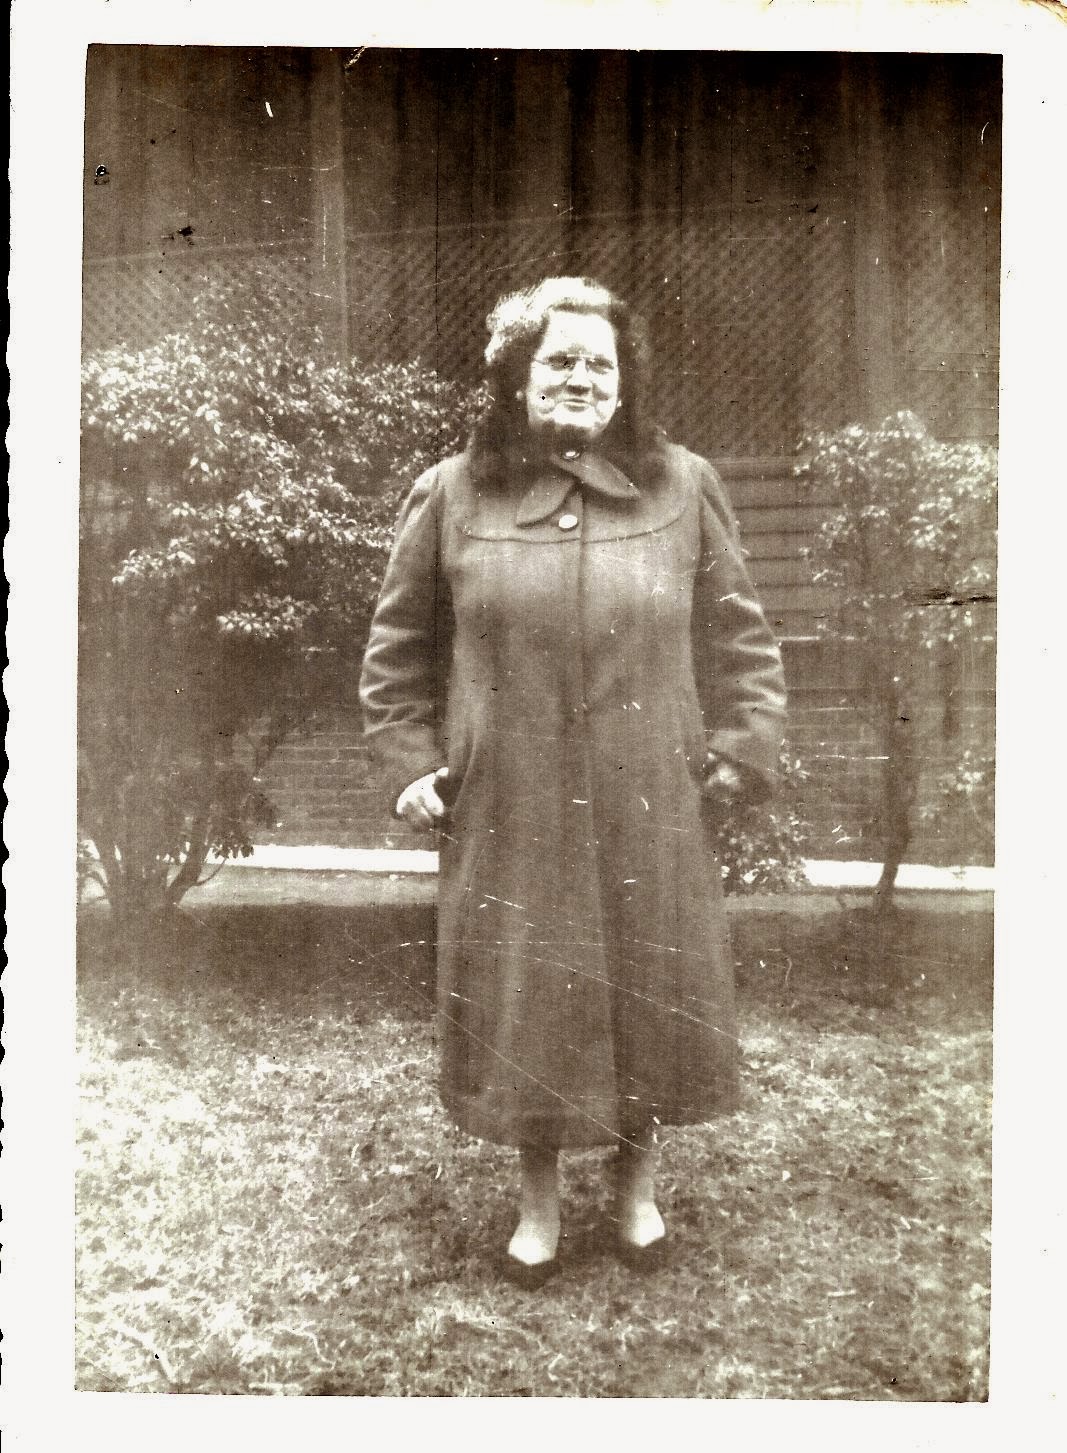 Your Great Great Aunt Eva (LeVangie) Holbrook